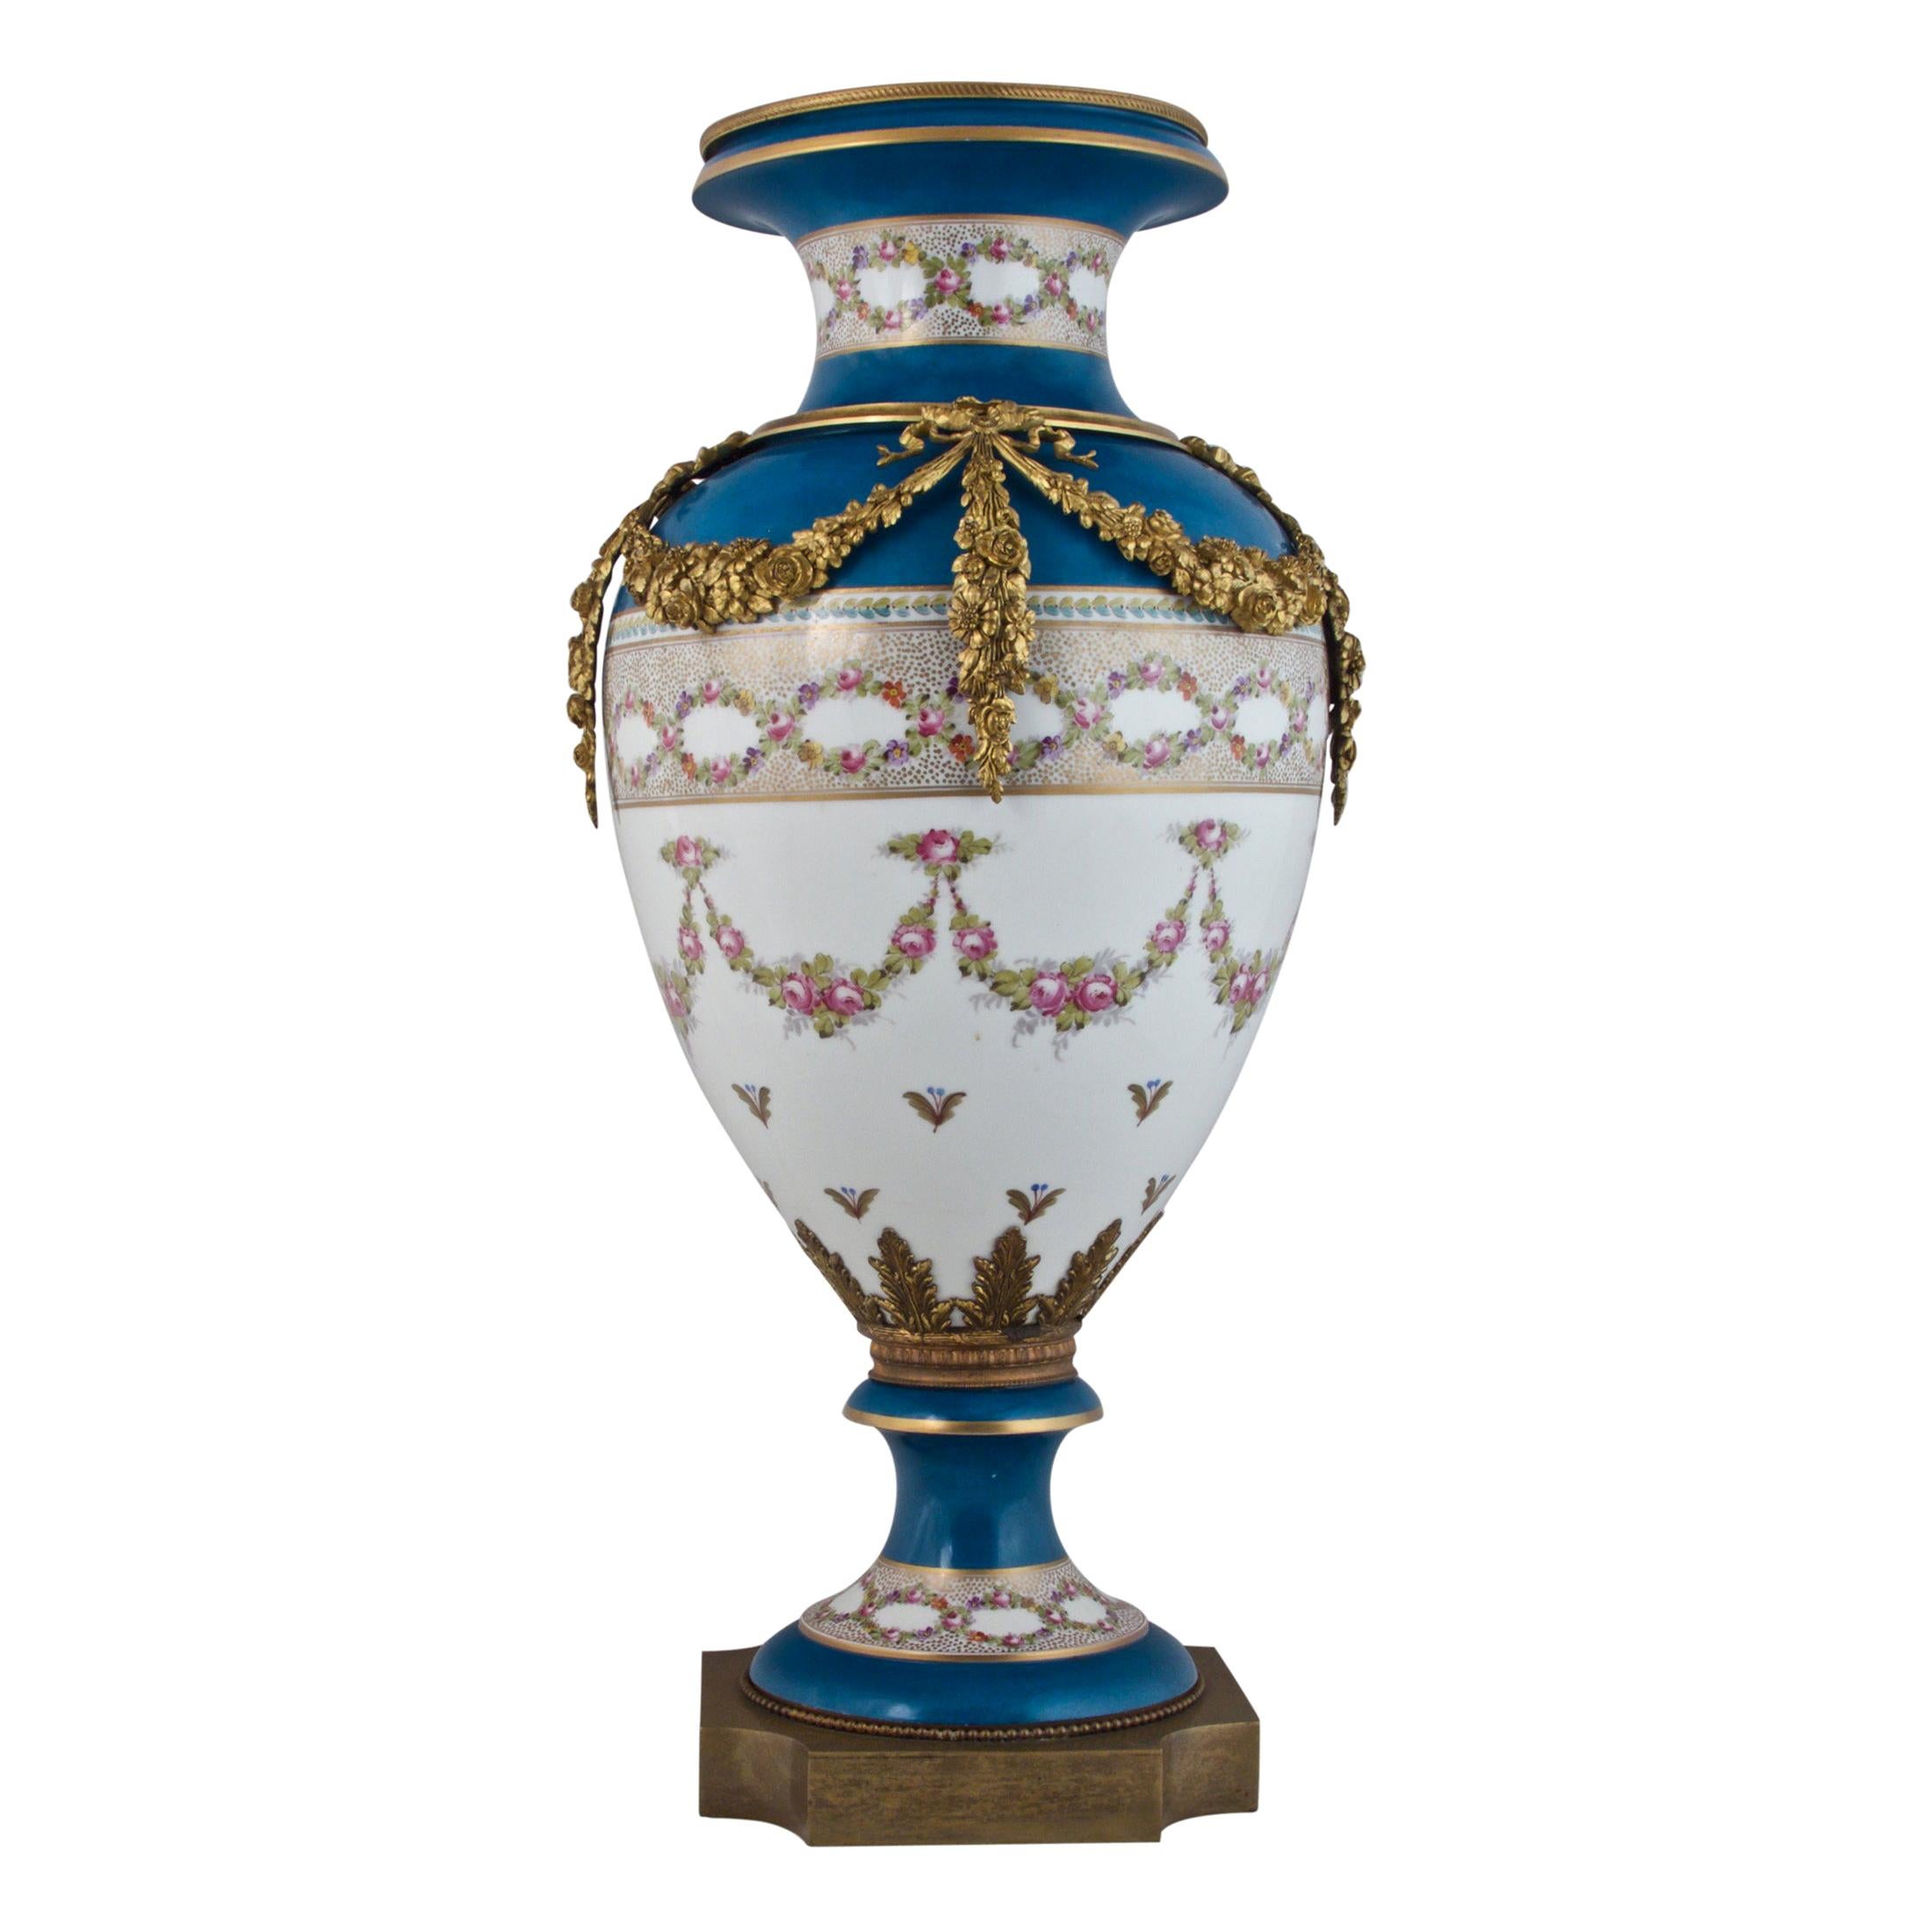 Late 19th Century French Sèvres-Style Ormolu-Mounted Porcelain Vase